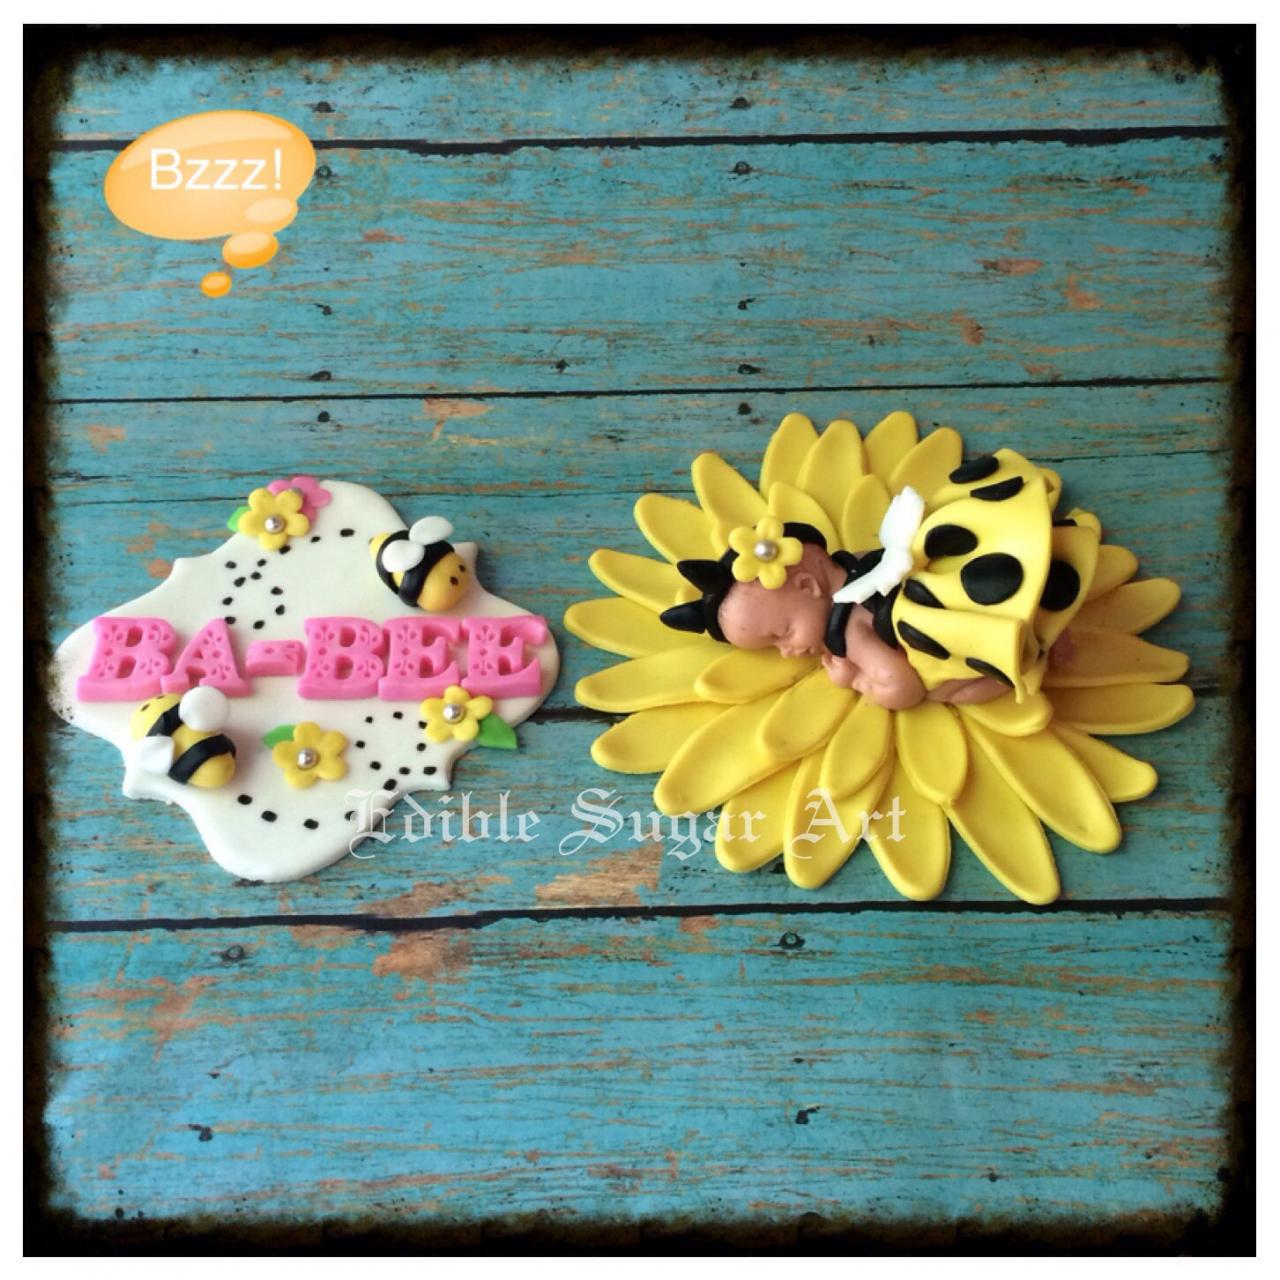 BUMBLE BEE BABY Shower Cake topper fondant toppers baby shower first birthday bumble bee flower decorations favors edible toppers